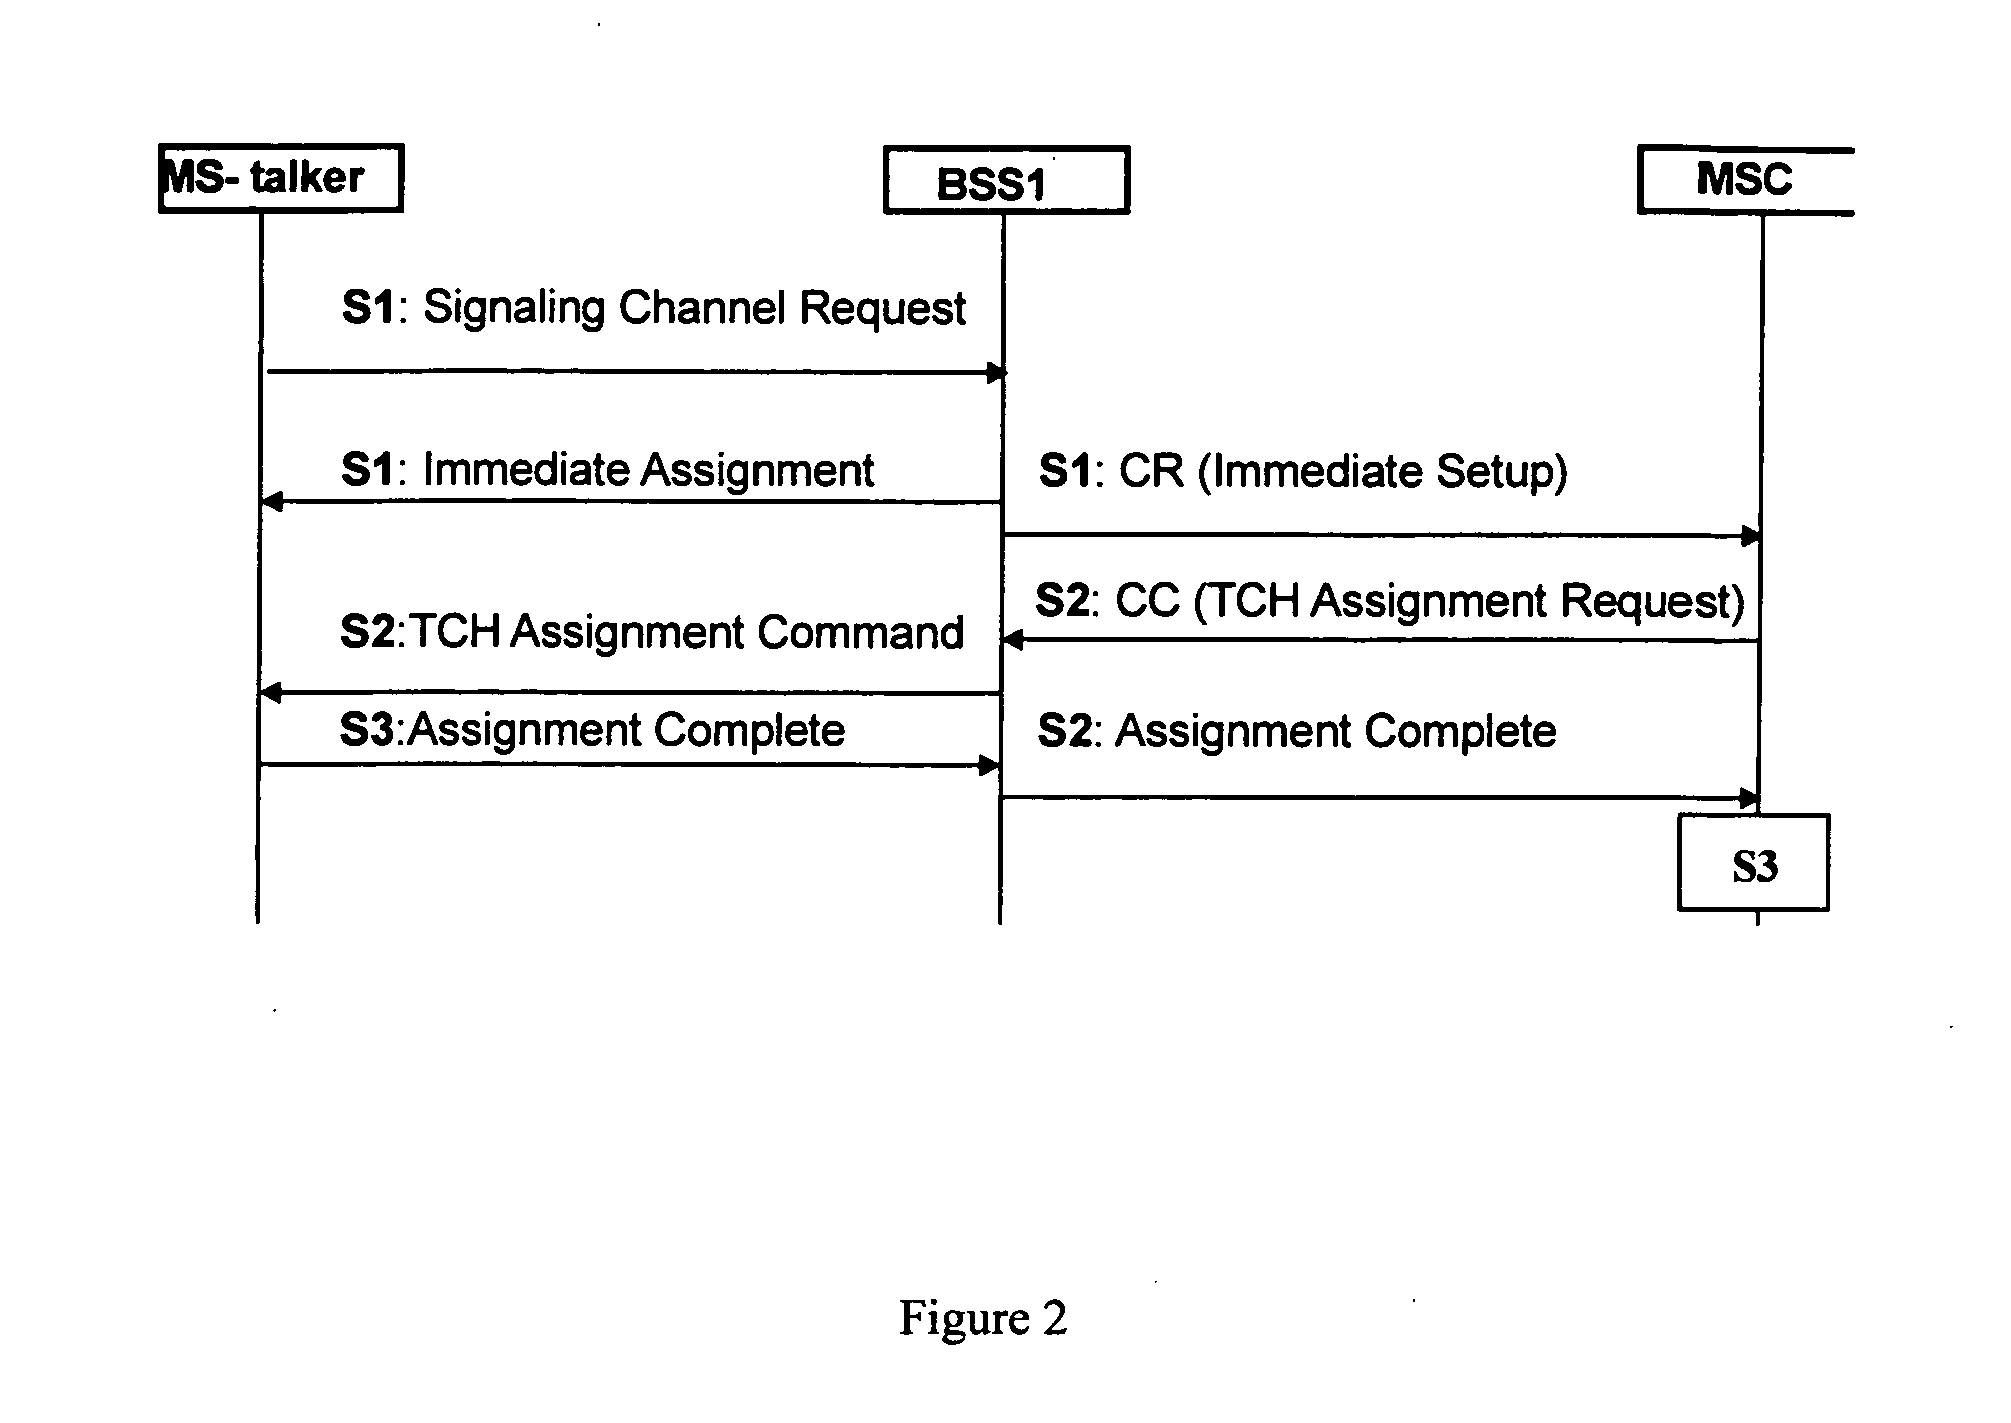 Method and apparatus for implementing voice group call service and data group call service by circuit switch or packet switch respectively in mobile network